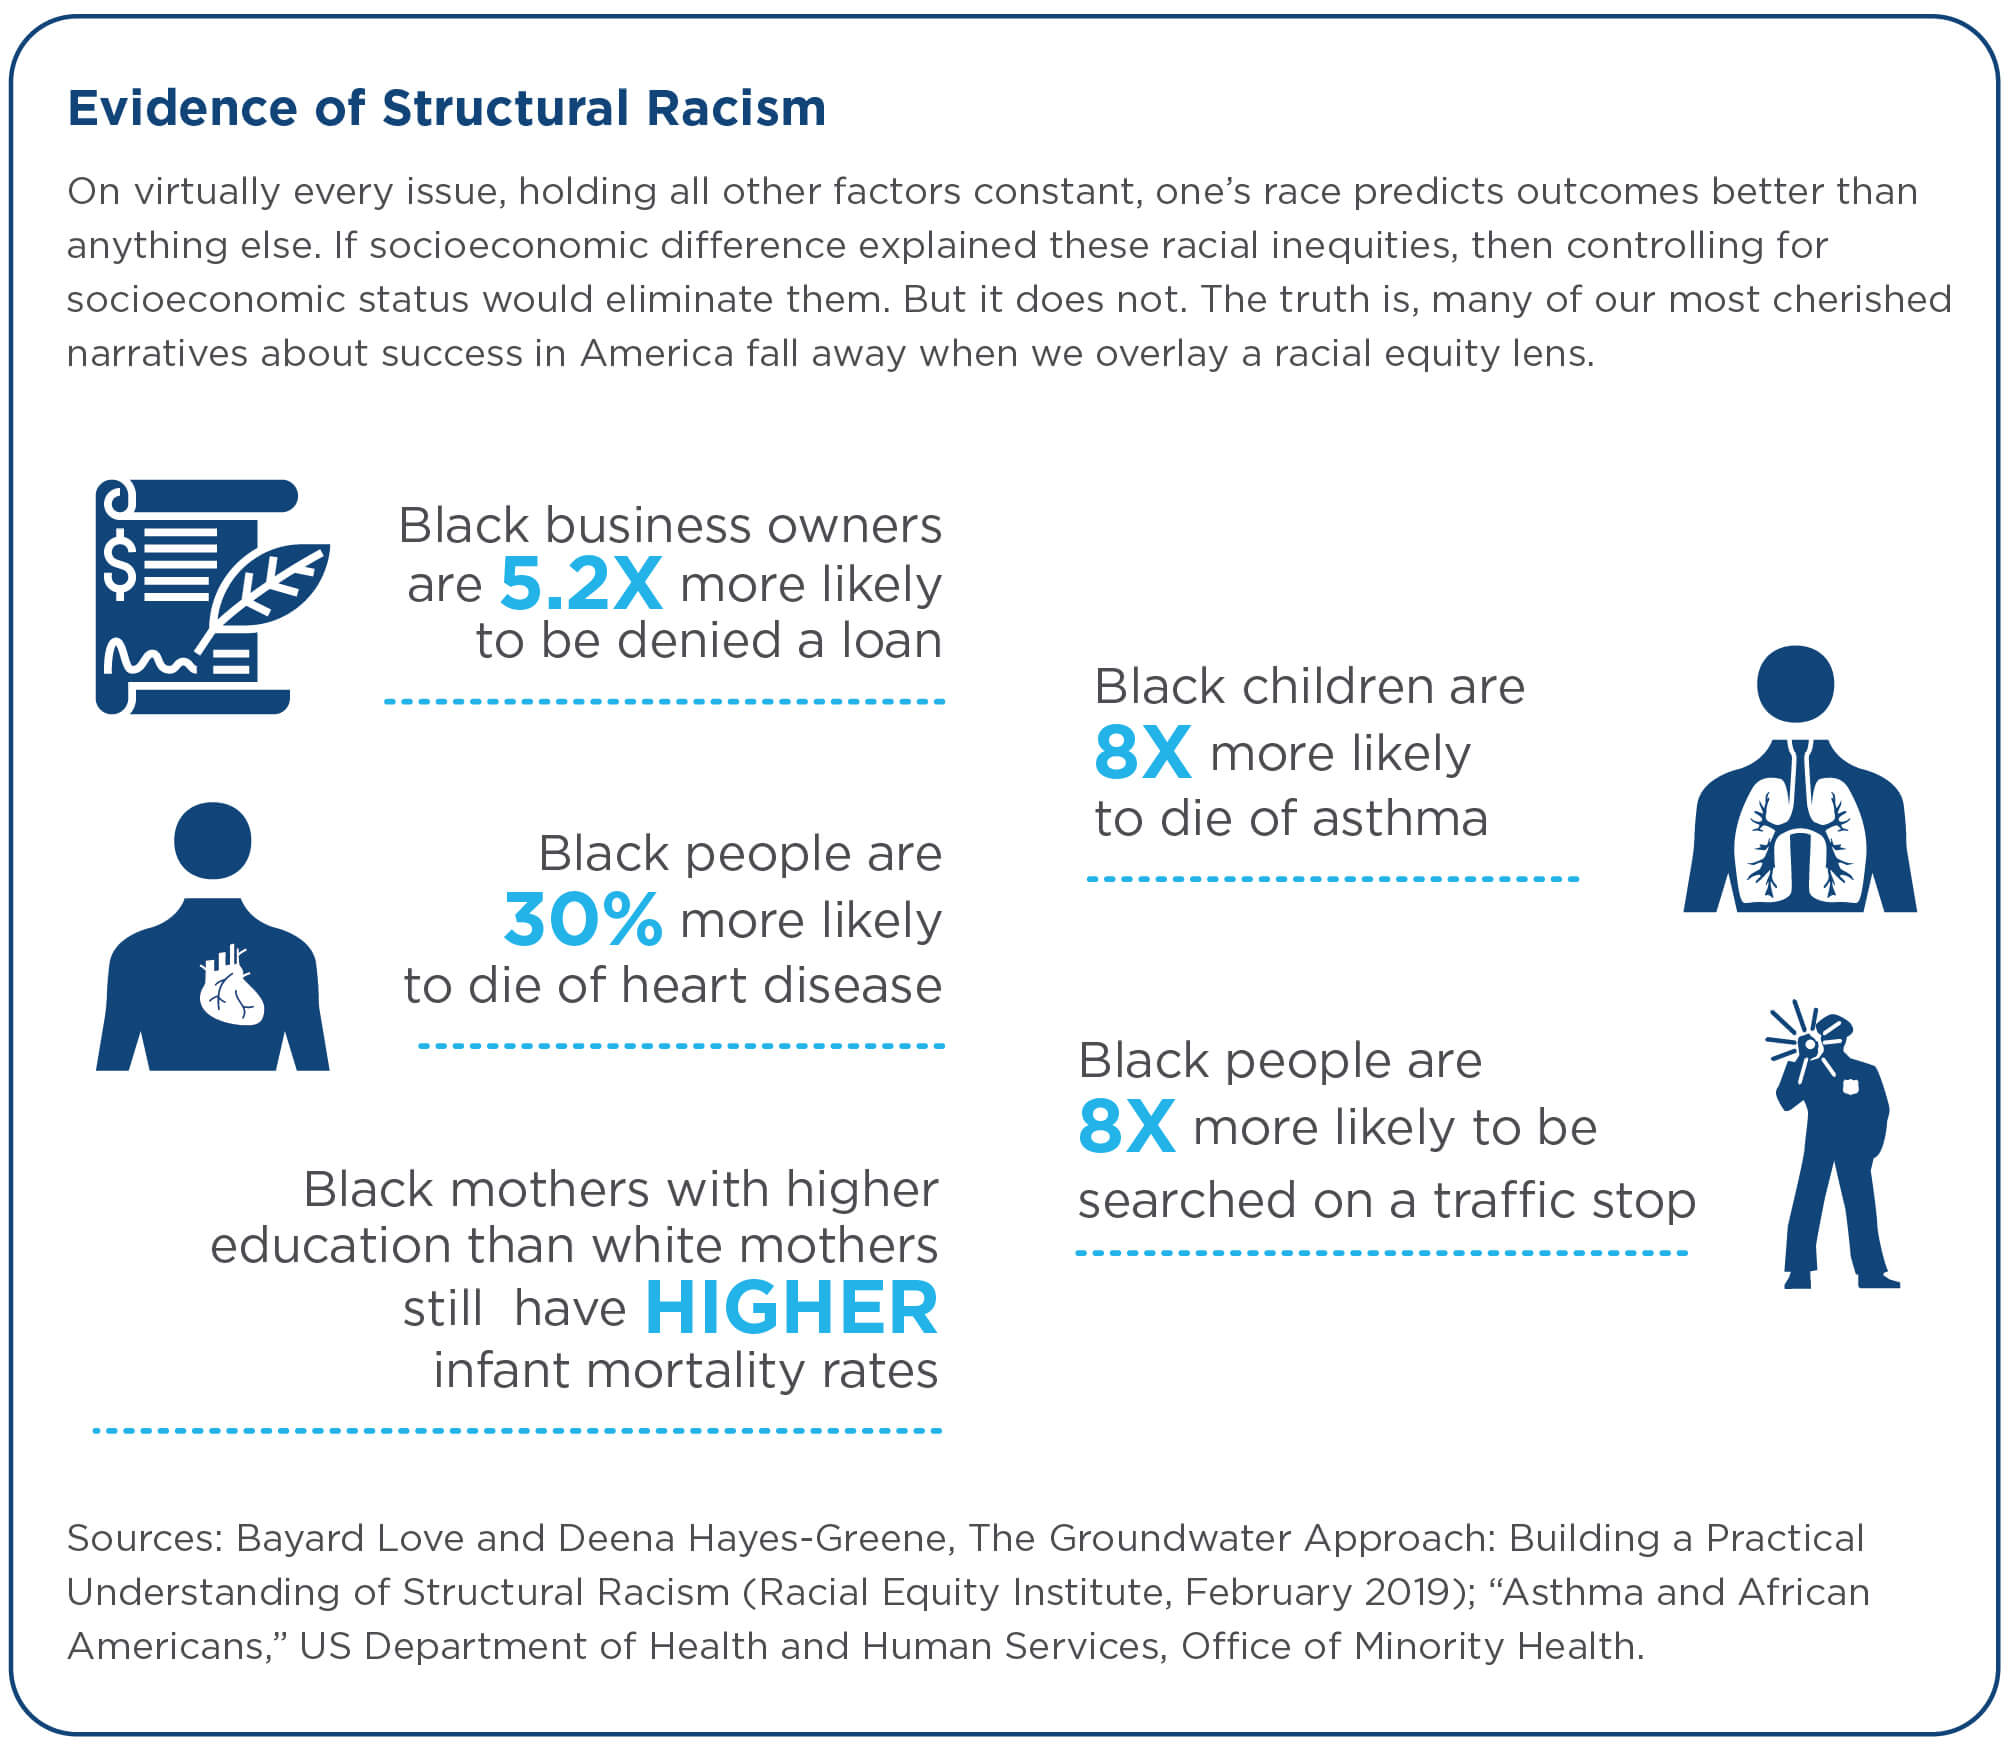 Evidence of Structural Racism diagram